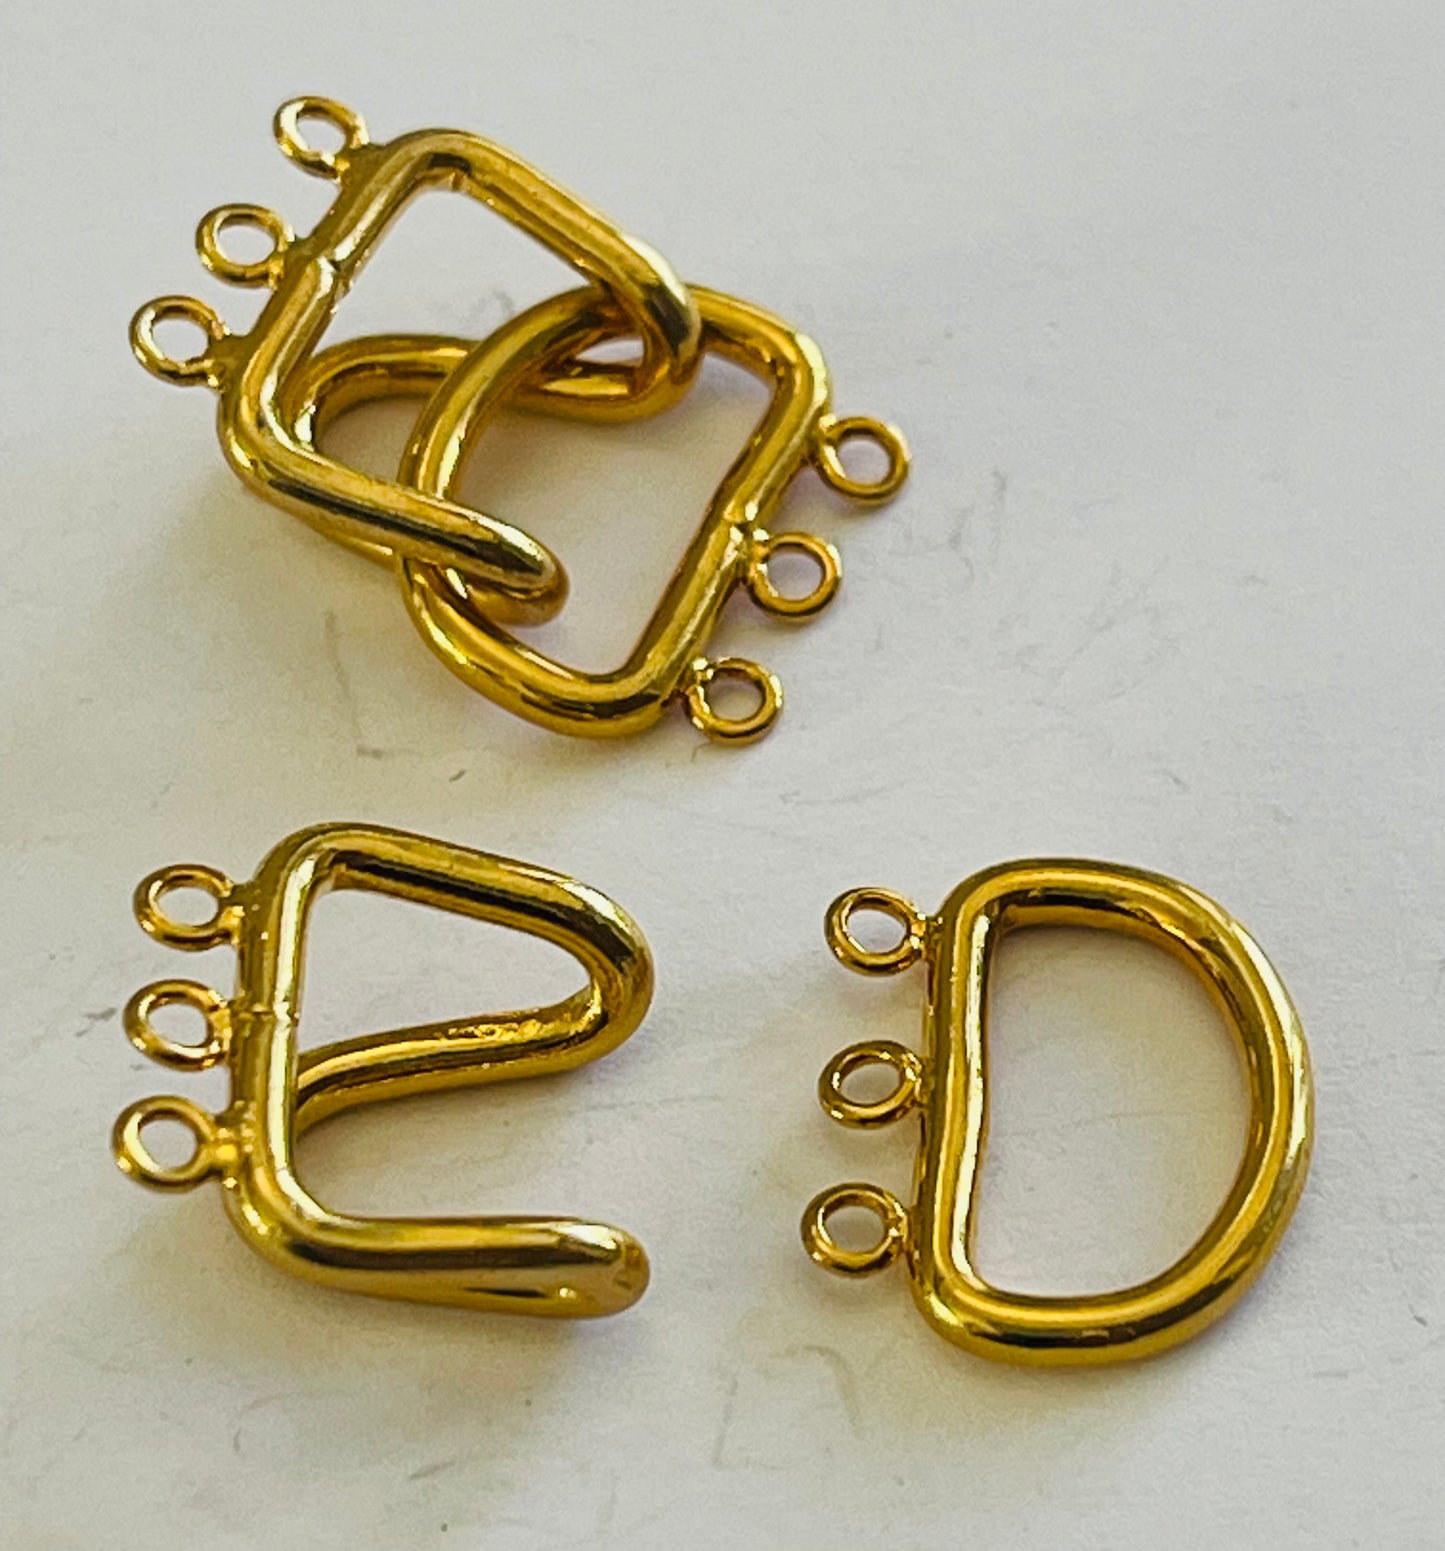 Clasp hook 3 strands square gold plate 2 sets